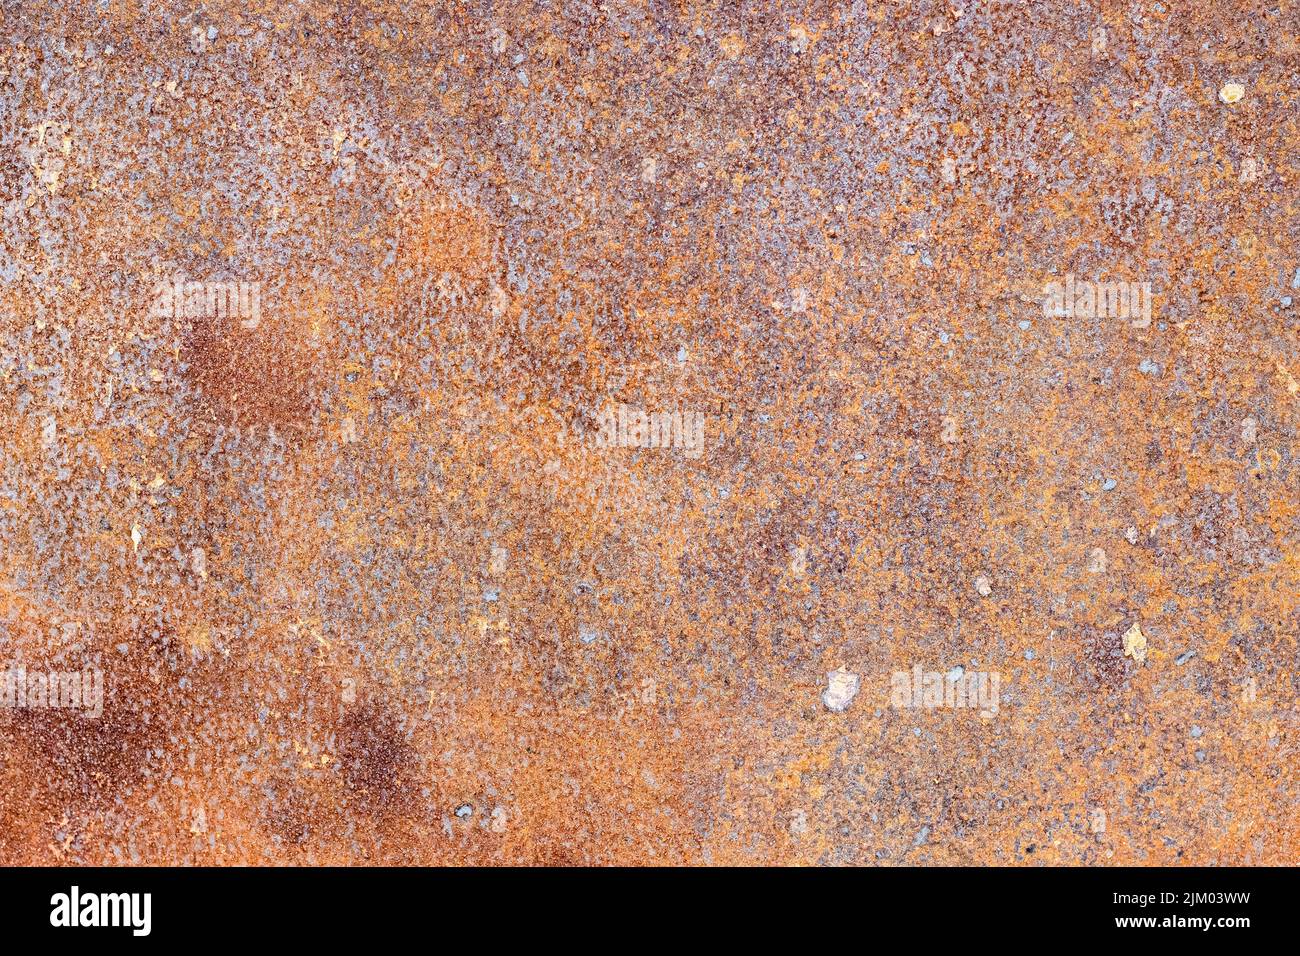 Rustic old iron metal sheet with distressed rough texture for background Stock Photo